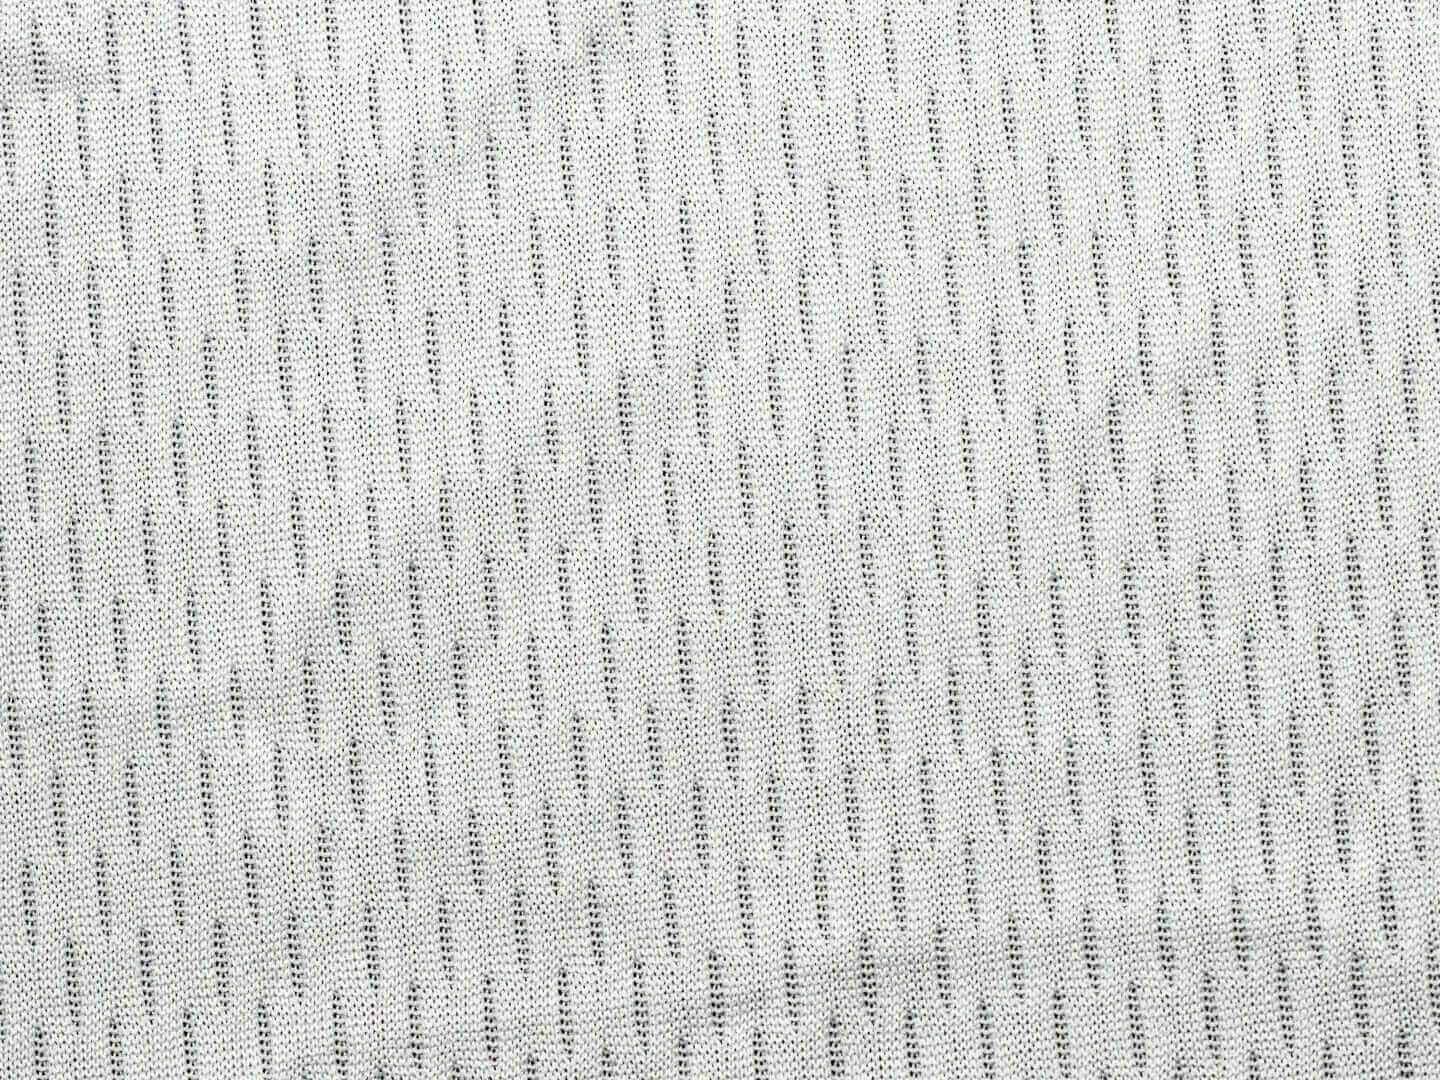 Sublimation Fabric Material sp 011 ultra mesh_sublimation apparel manufacturing fabric